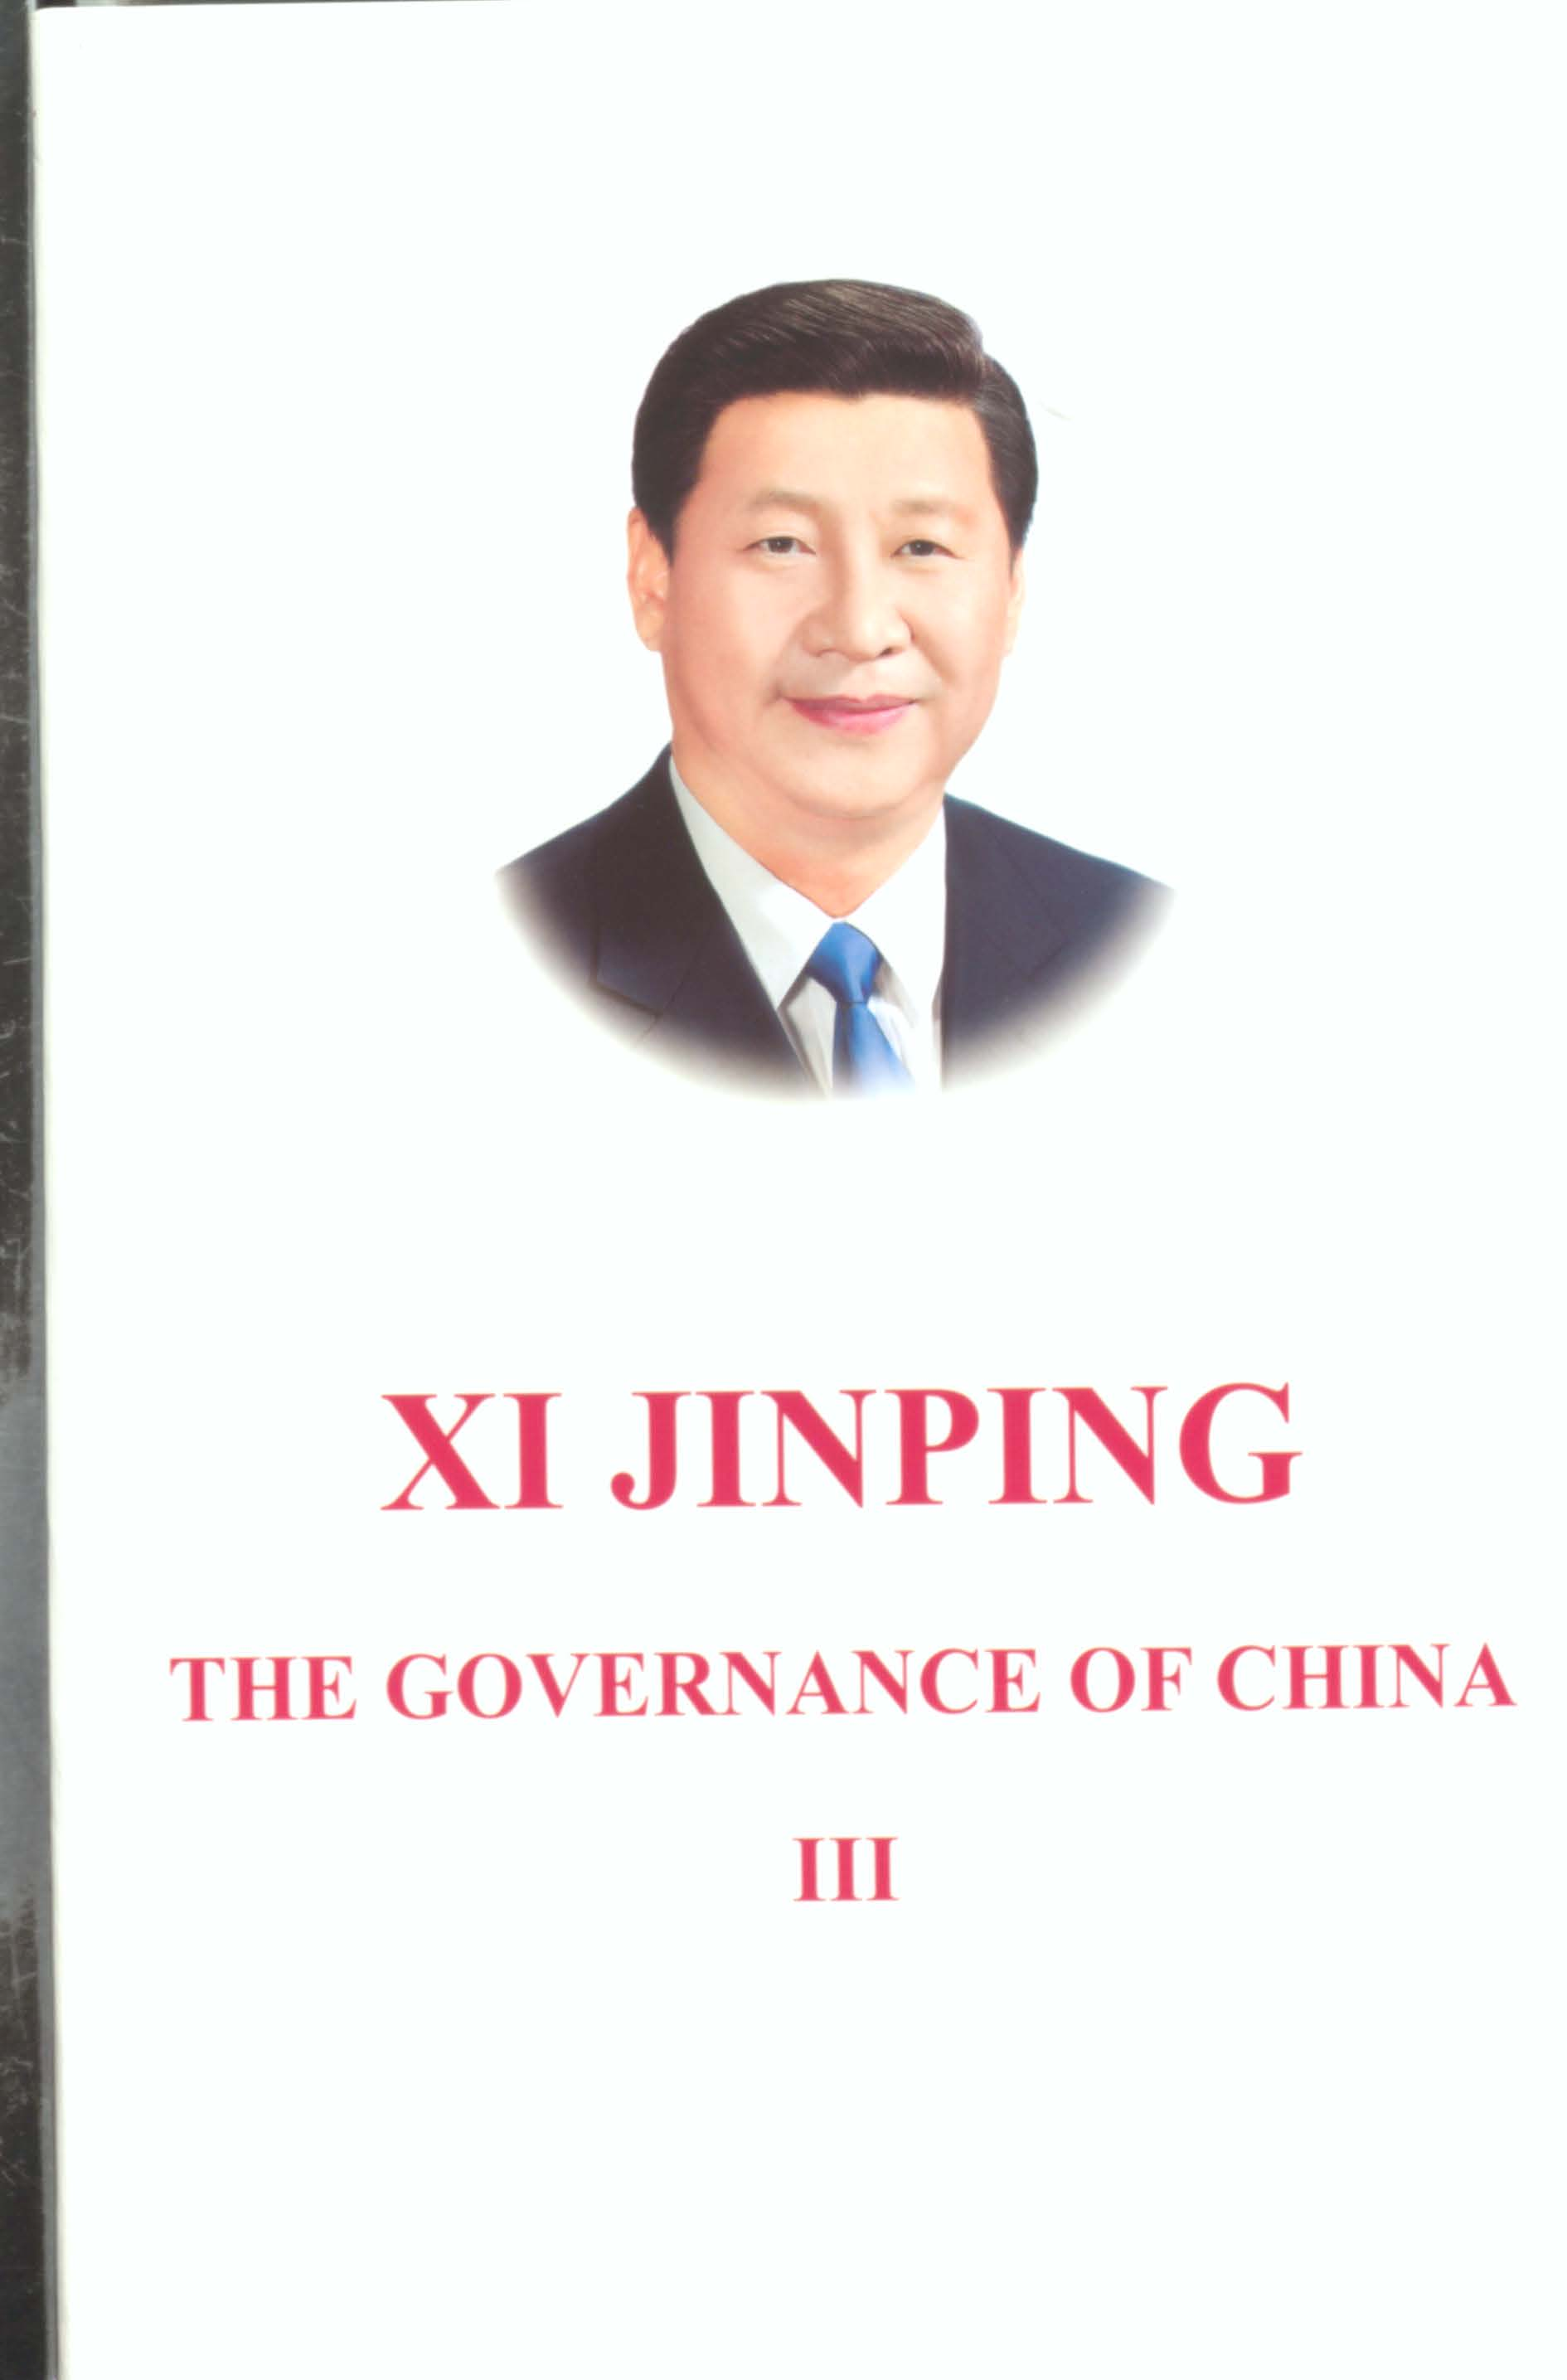 xl jinping the governance of china lll